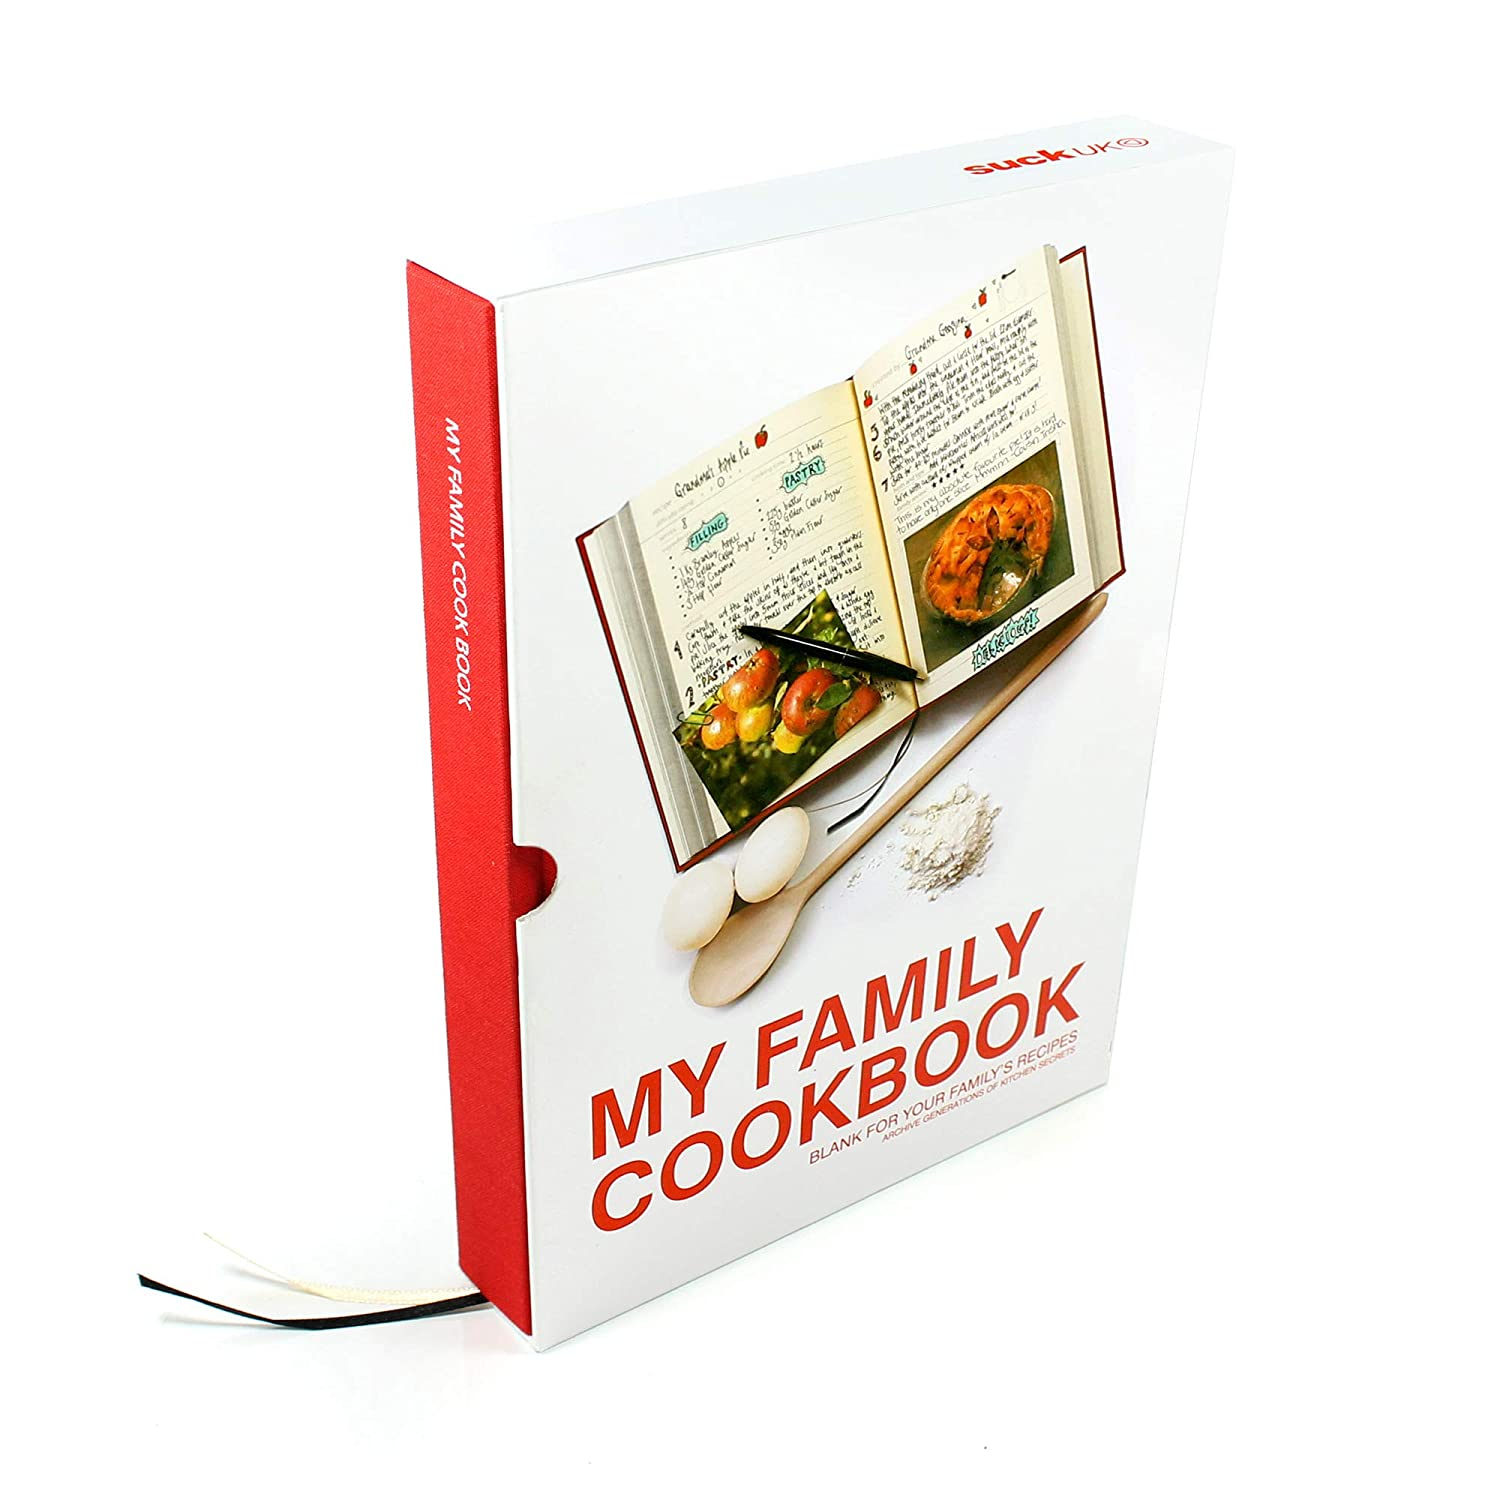 A Traditional Cookbook - for One Who Loves to Cook or at Least Tries to!